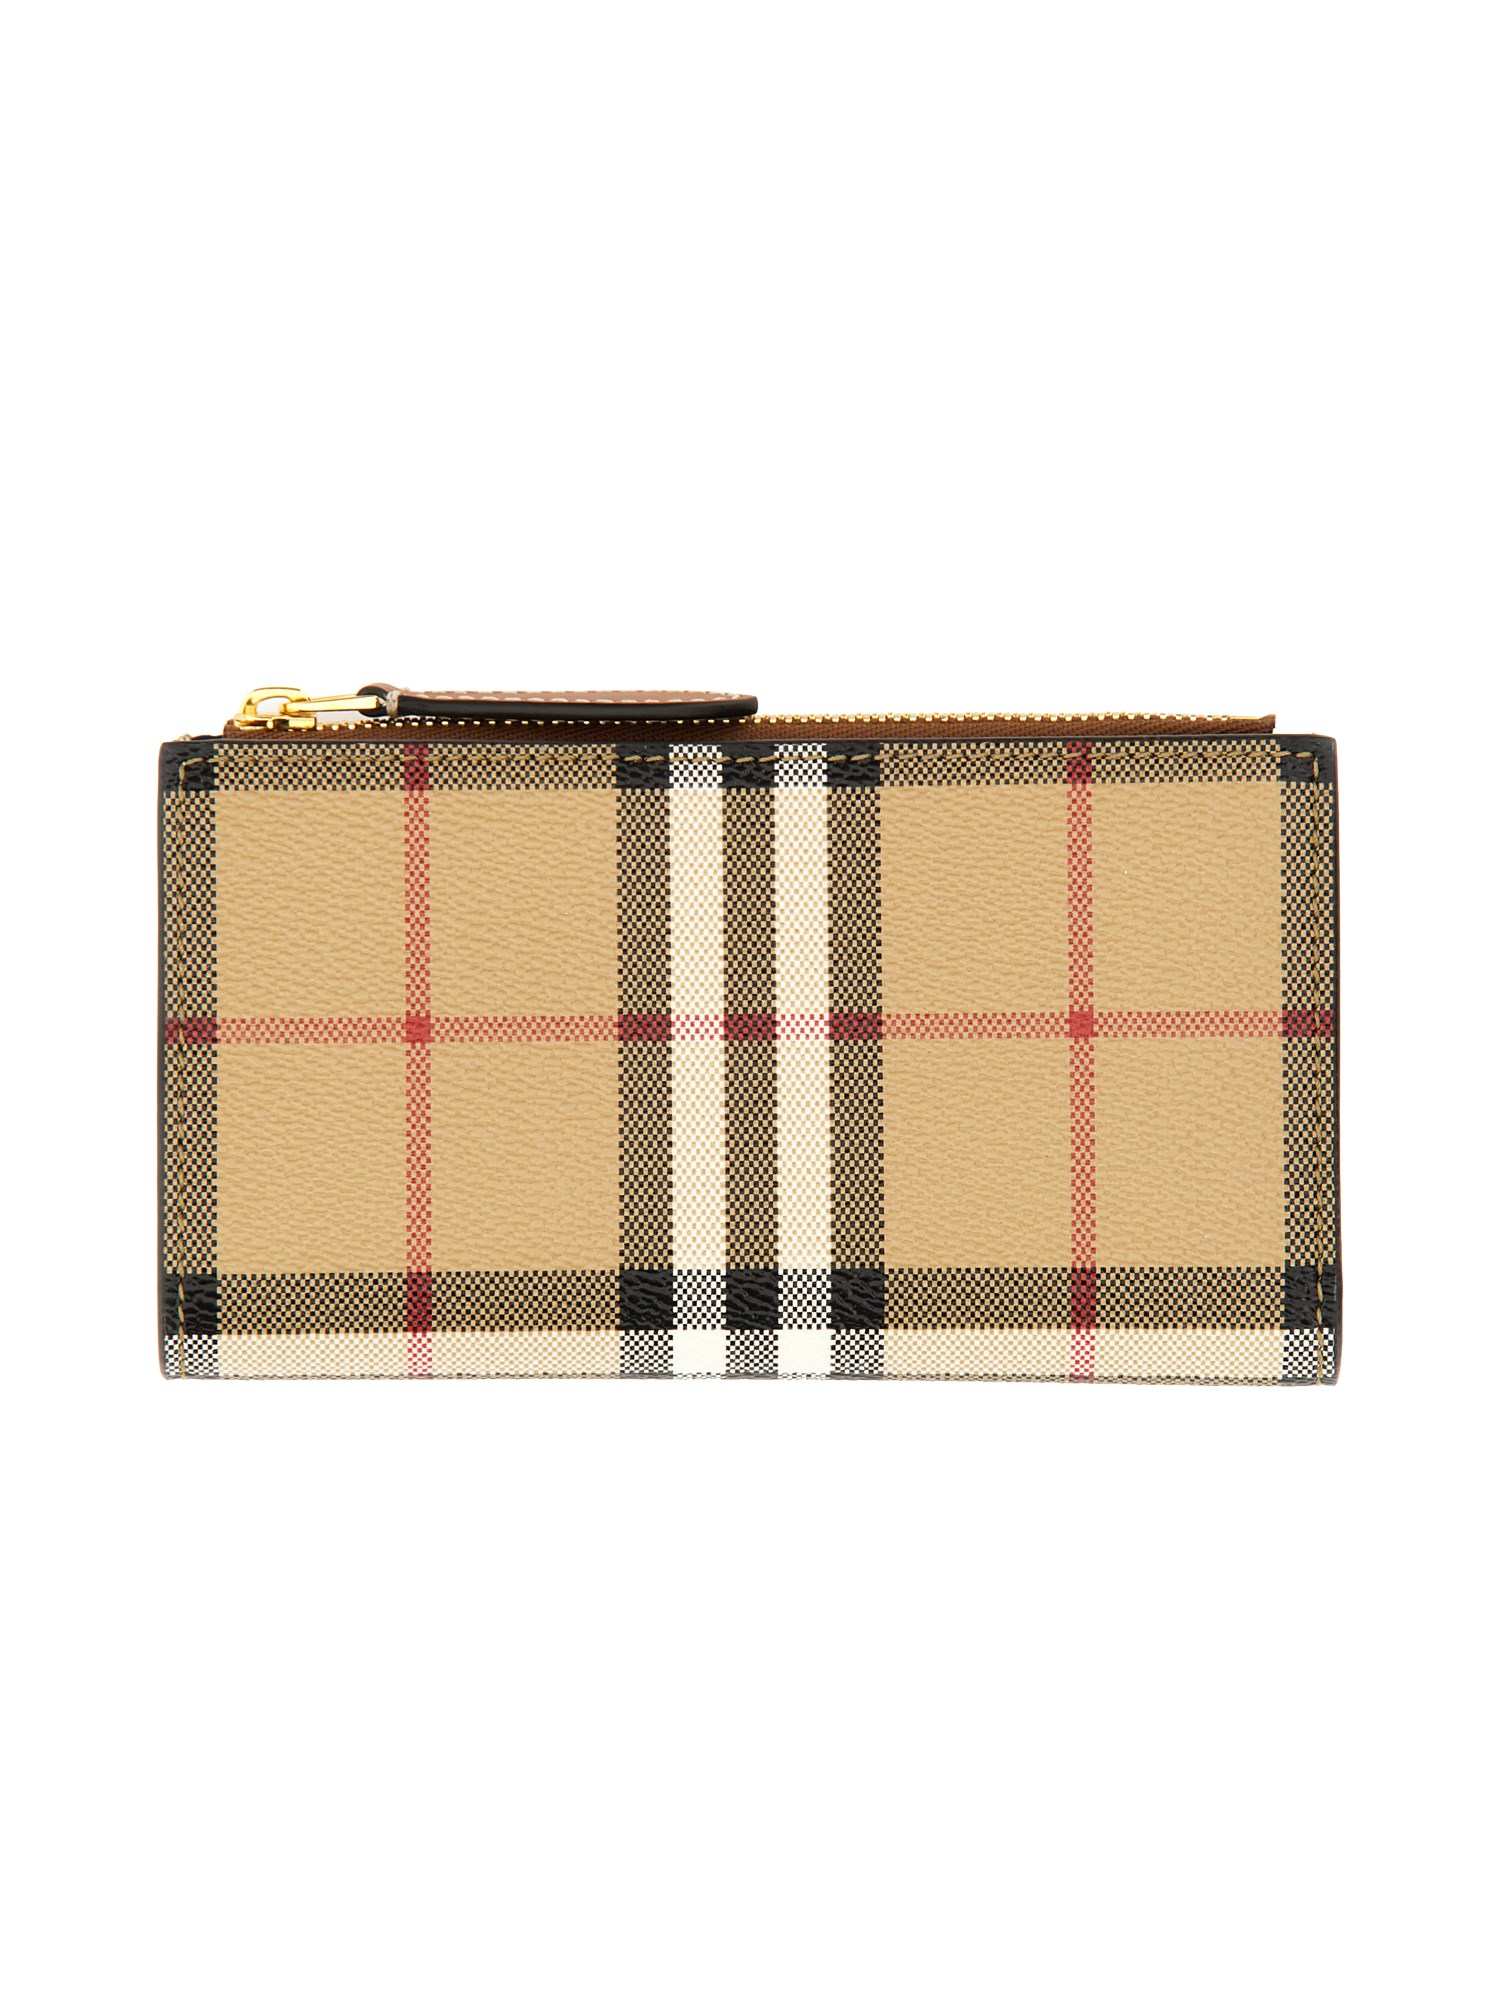 burberry wallet with check pattern